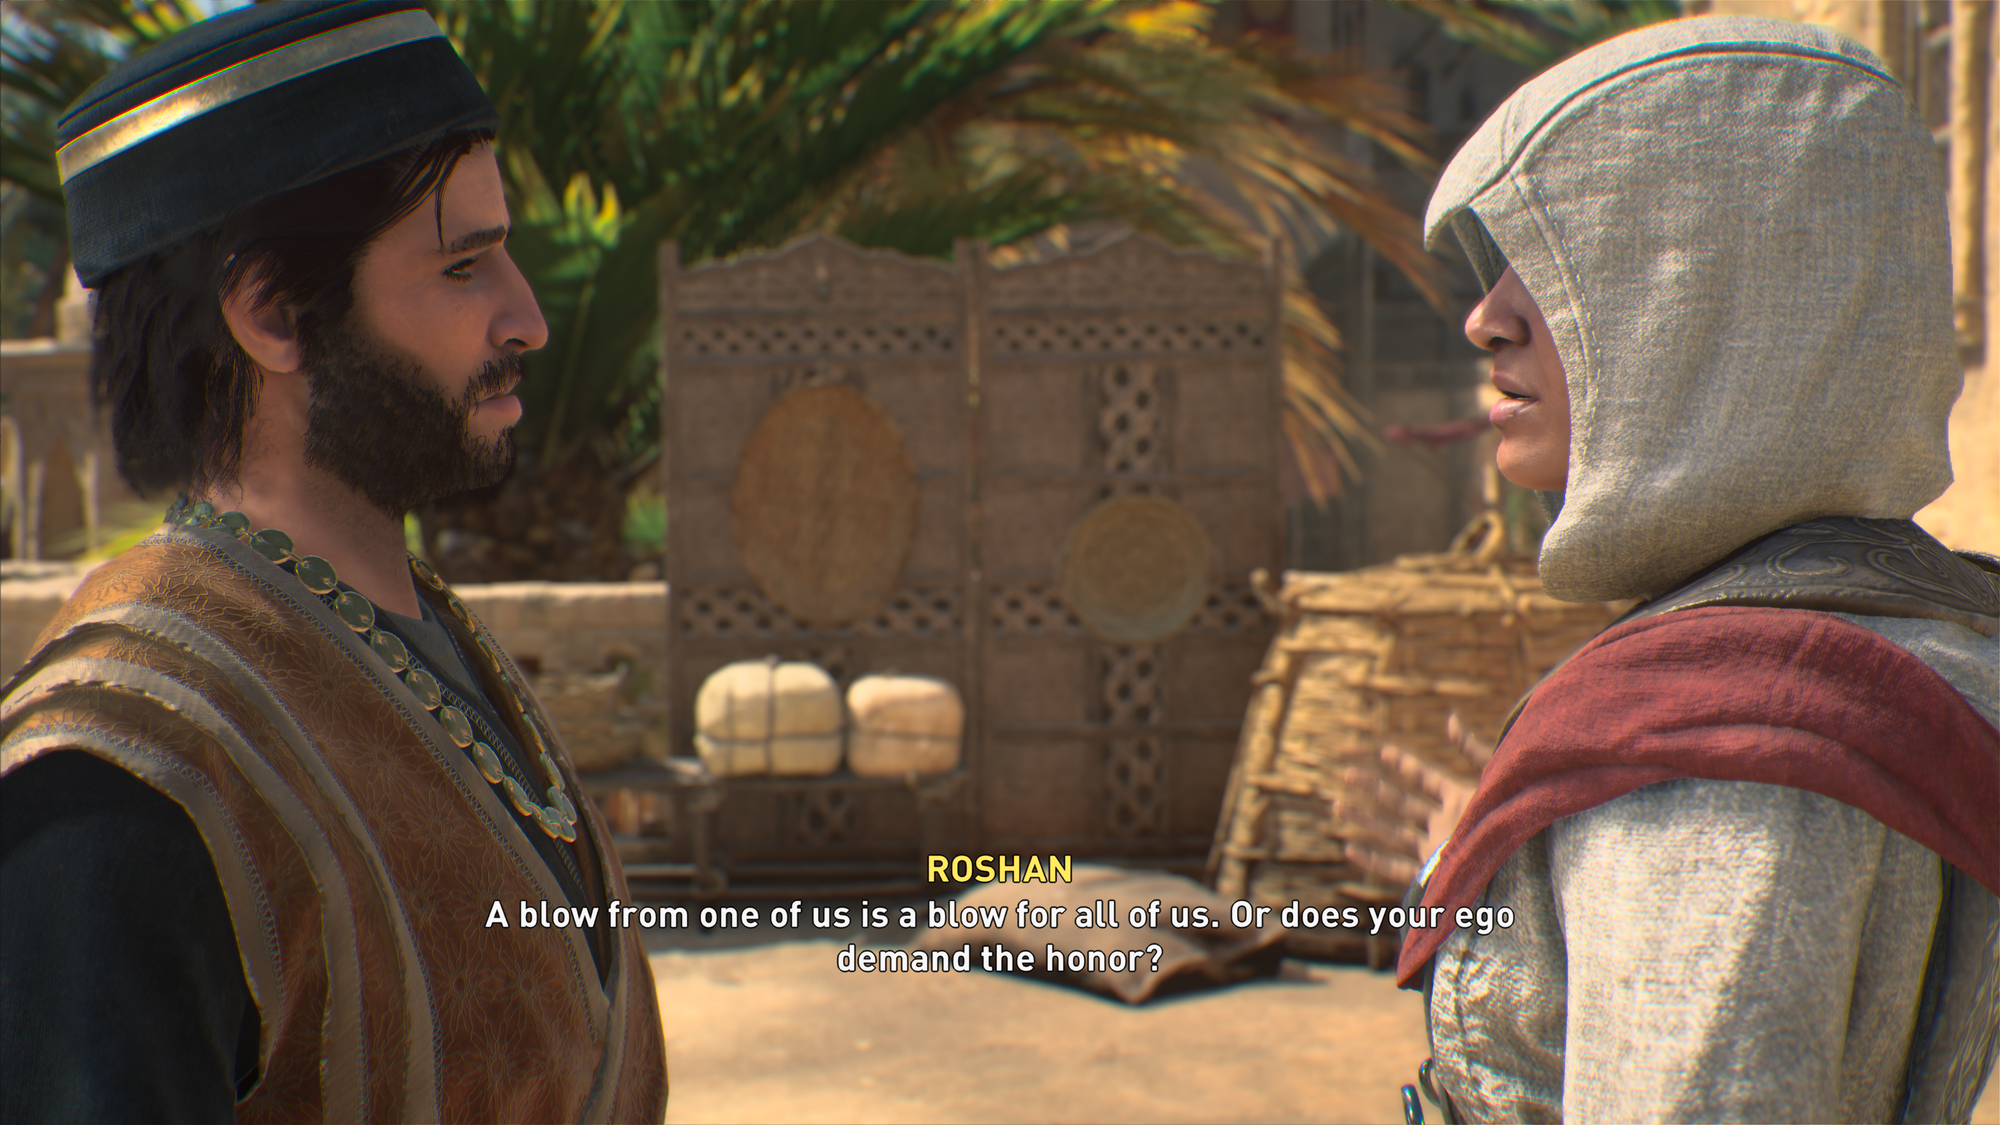 A screenshot of Asssassin's Creed mirage depicting a hooded assassin in conversation with a man wearing ornate clothes. Roshan is saying, "A blow from one of us is a blow for all of us. Or does your ego demand the honor?"